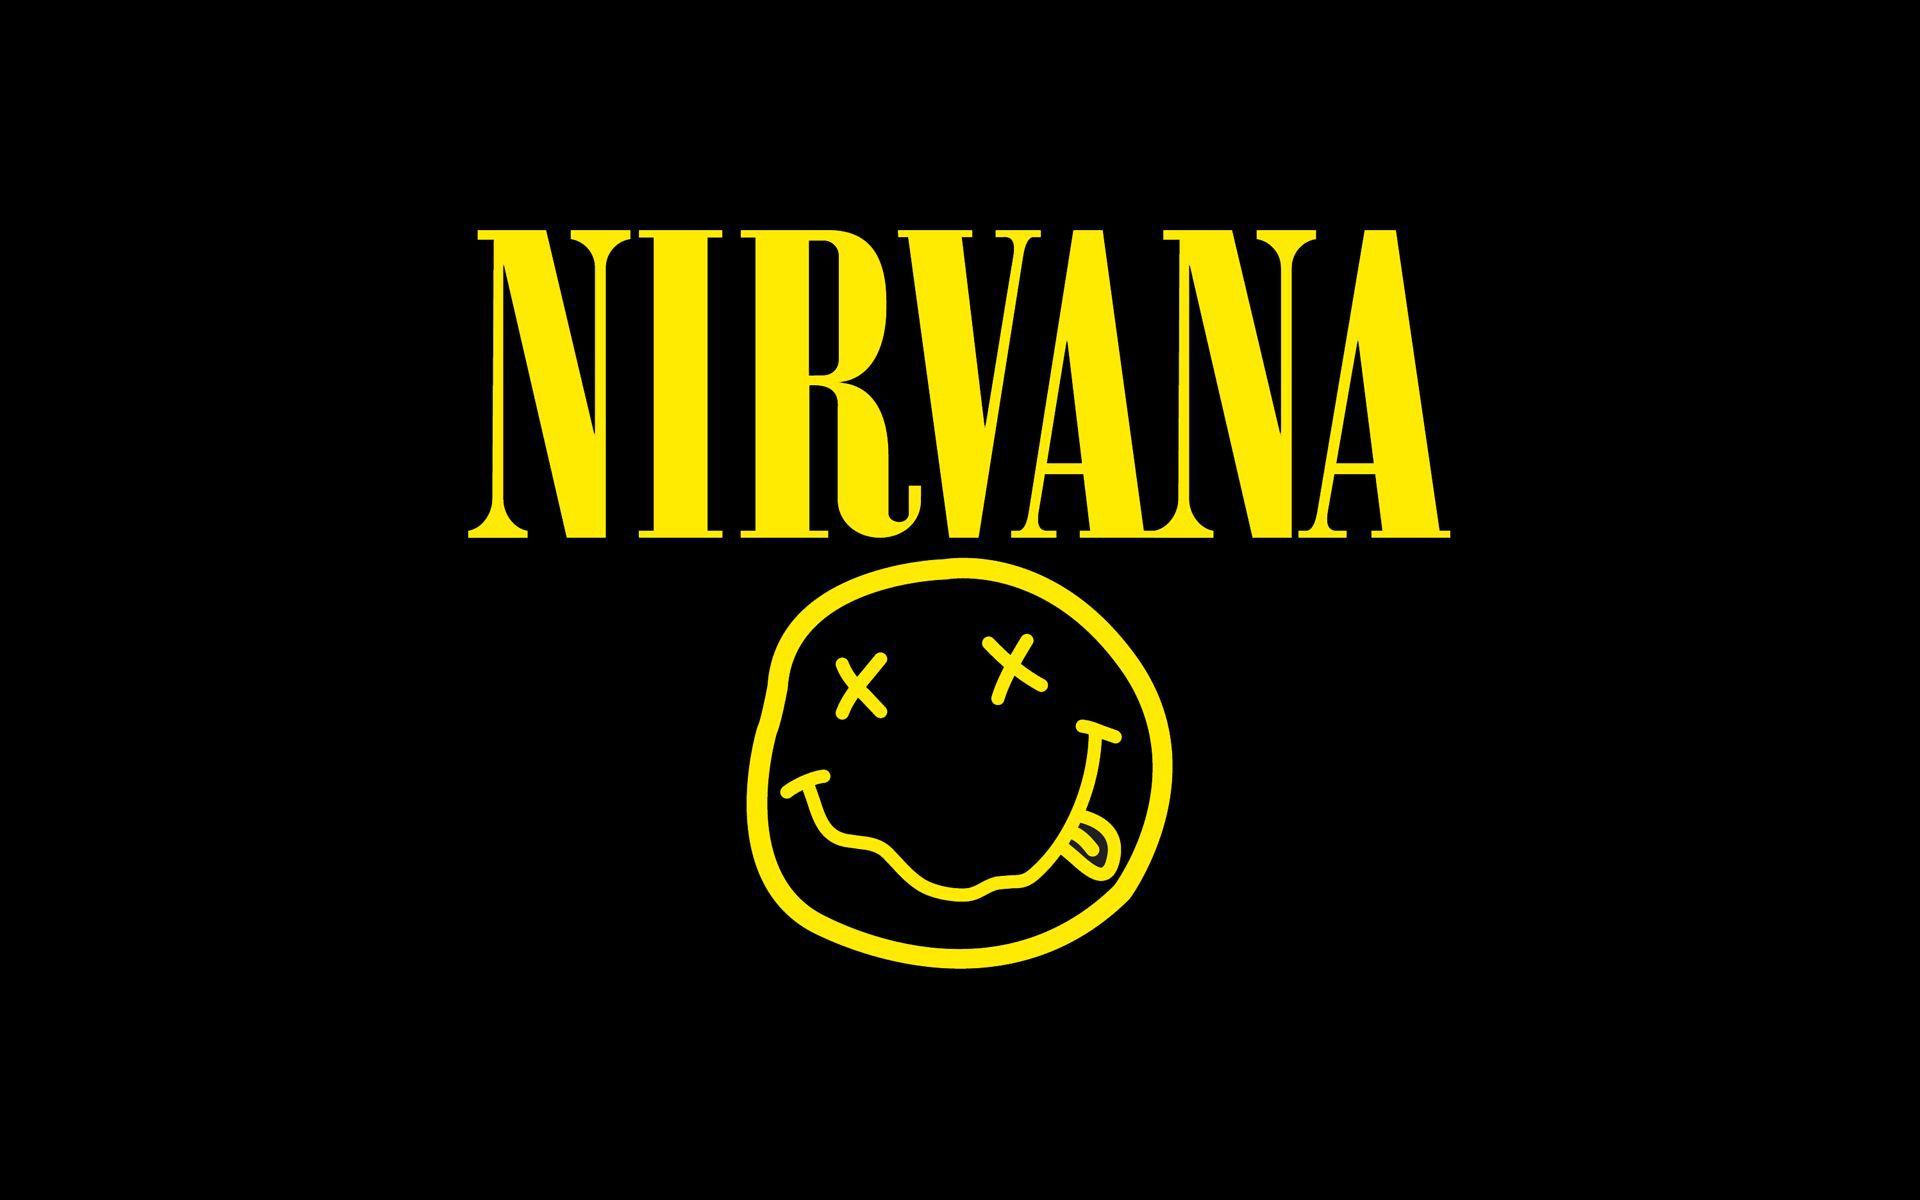 90S Grunge Bands Logo Wallpapers Wallpapers